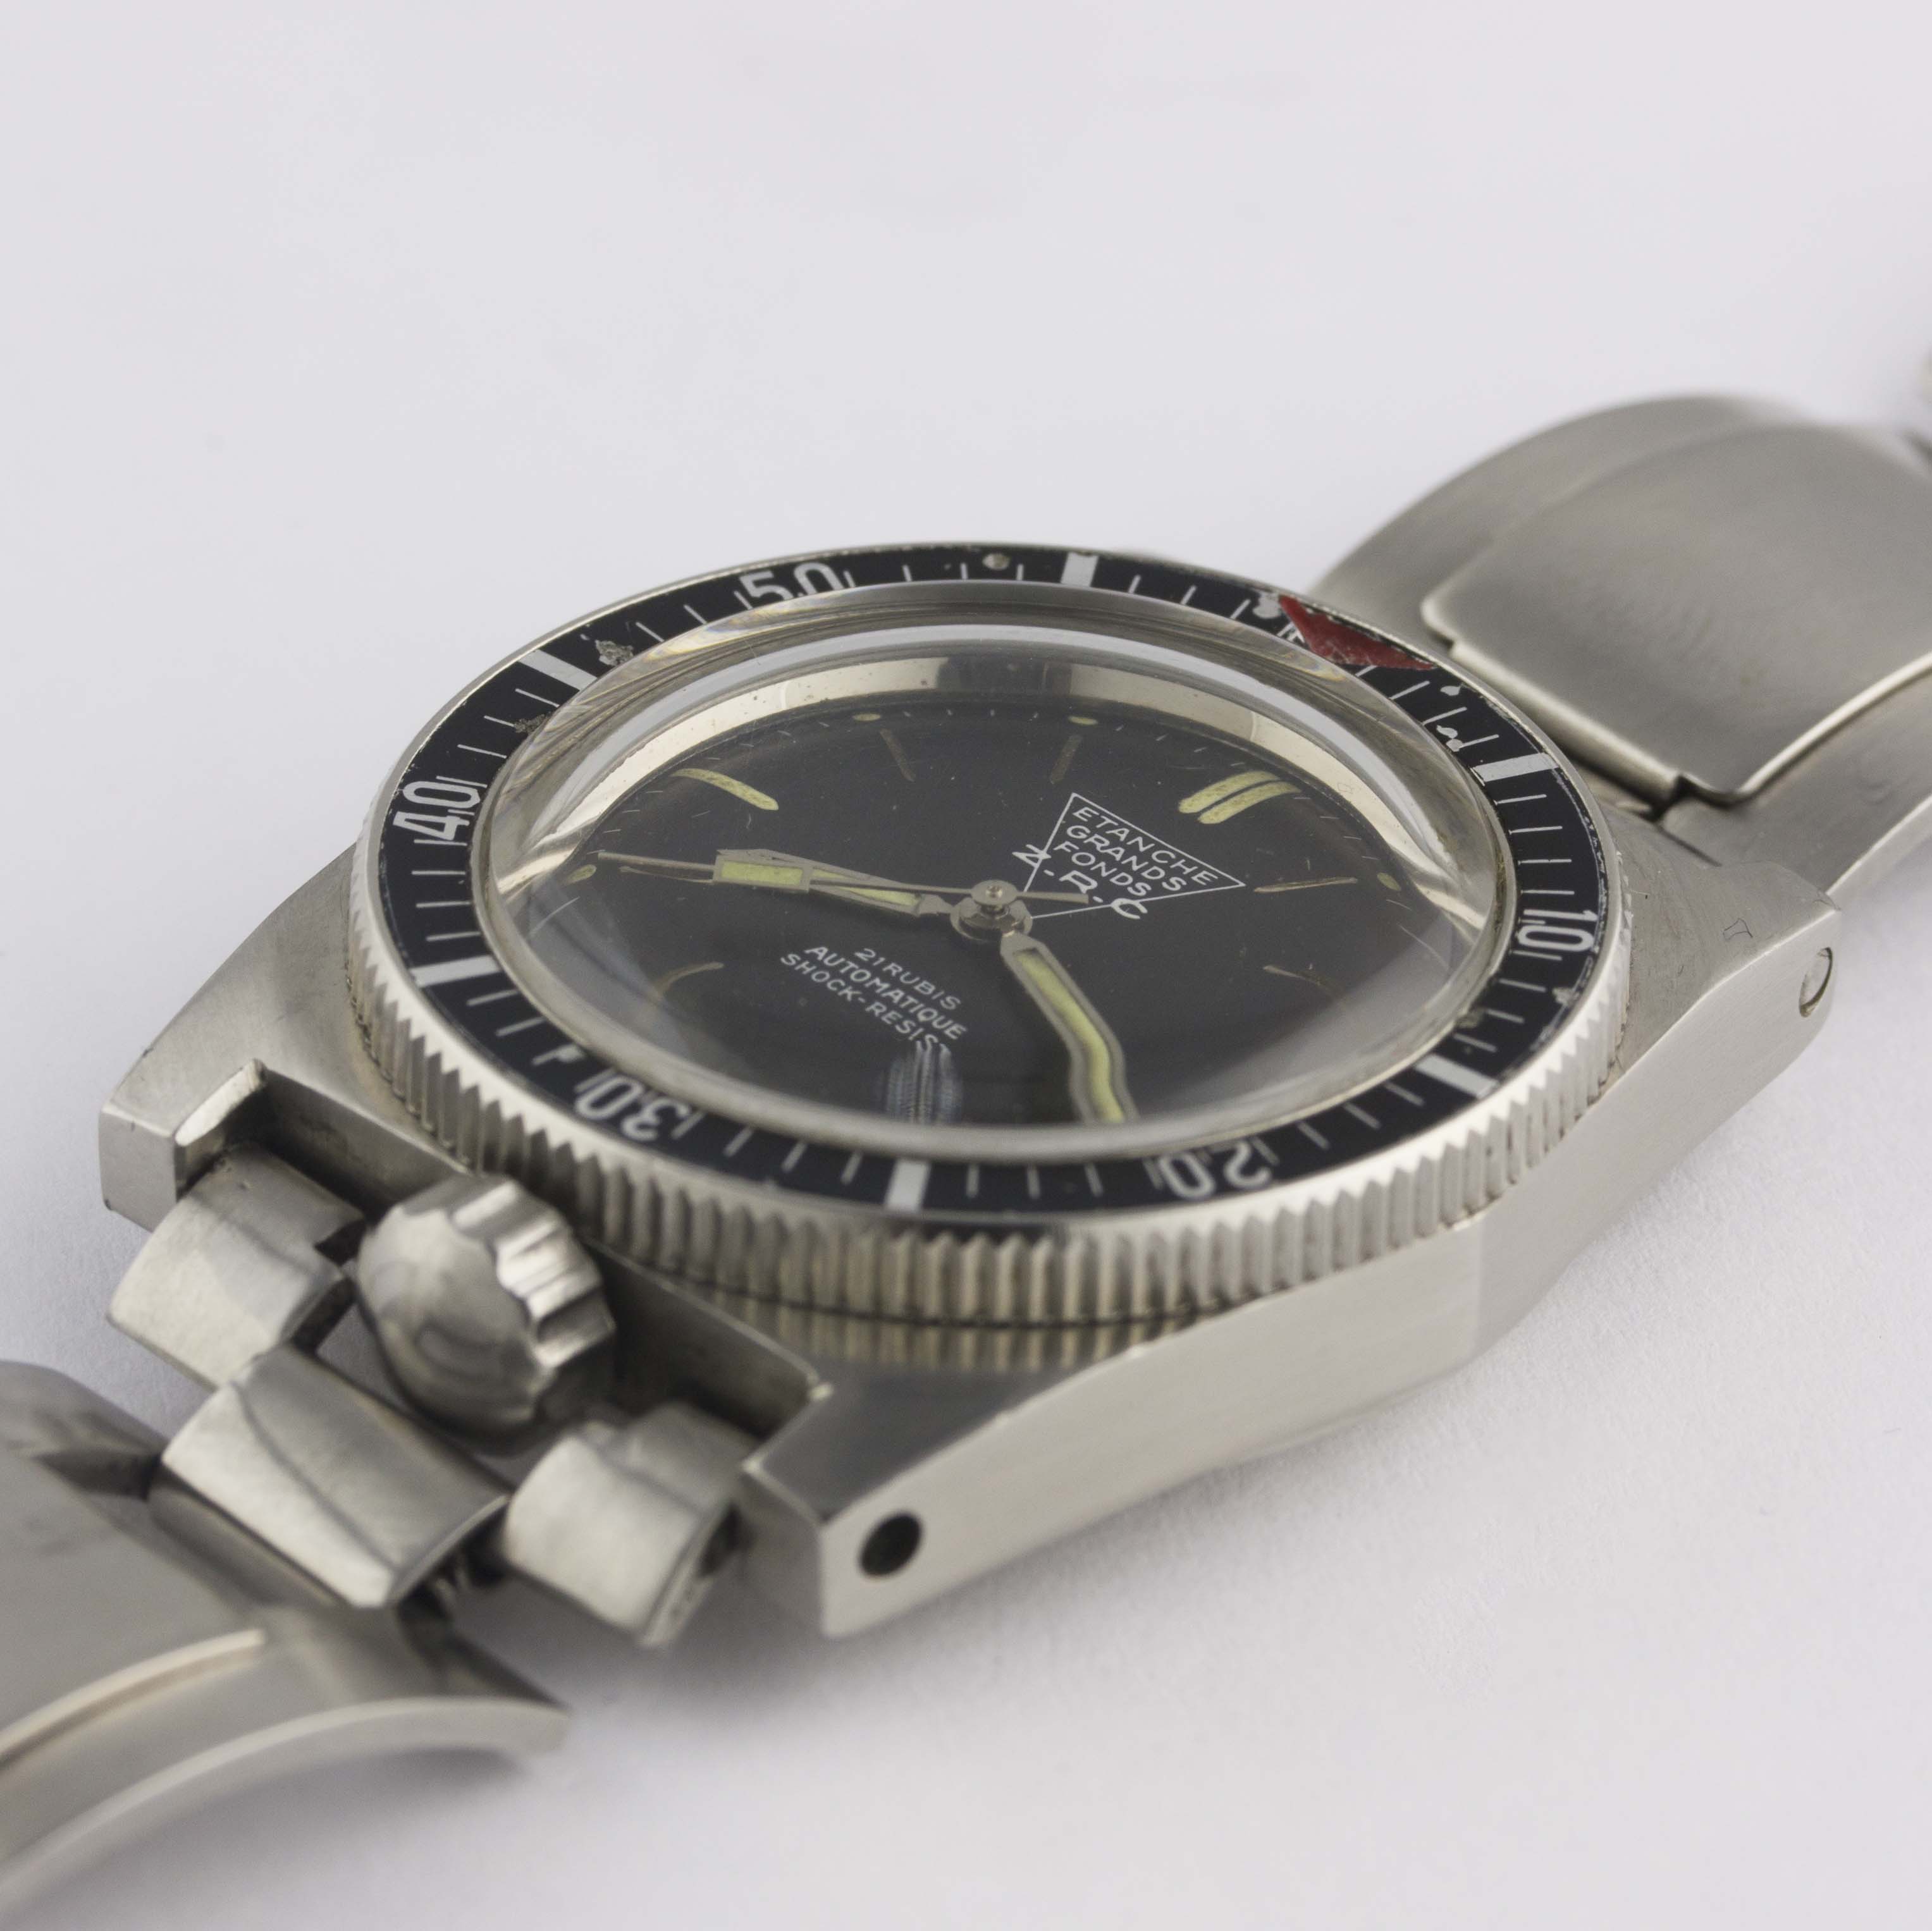 A VERY RARE GENTLEMAN'S STAINLESS STEEL Z.R.C. ETANCHE GRANDS FONDS 300M "SERIES III" AUTOMATIC - Image 3 of 11